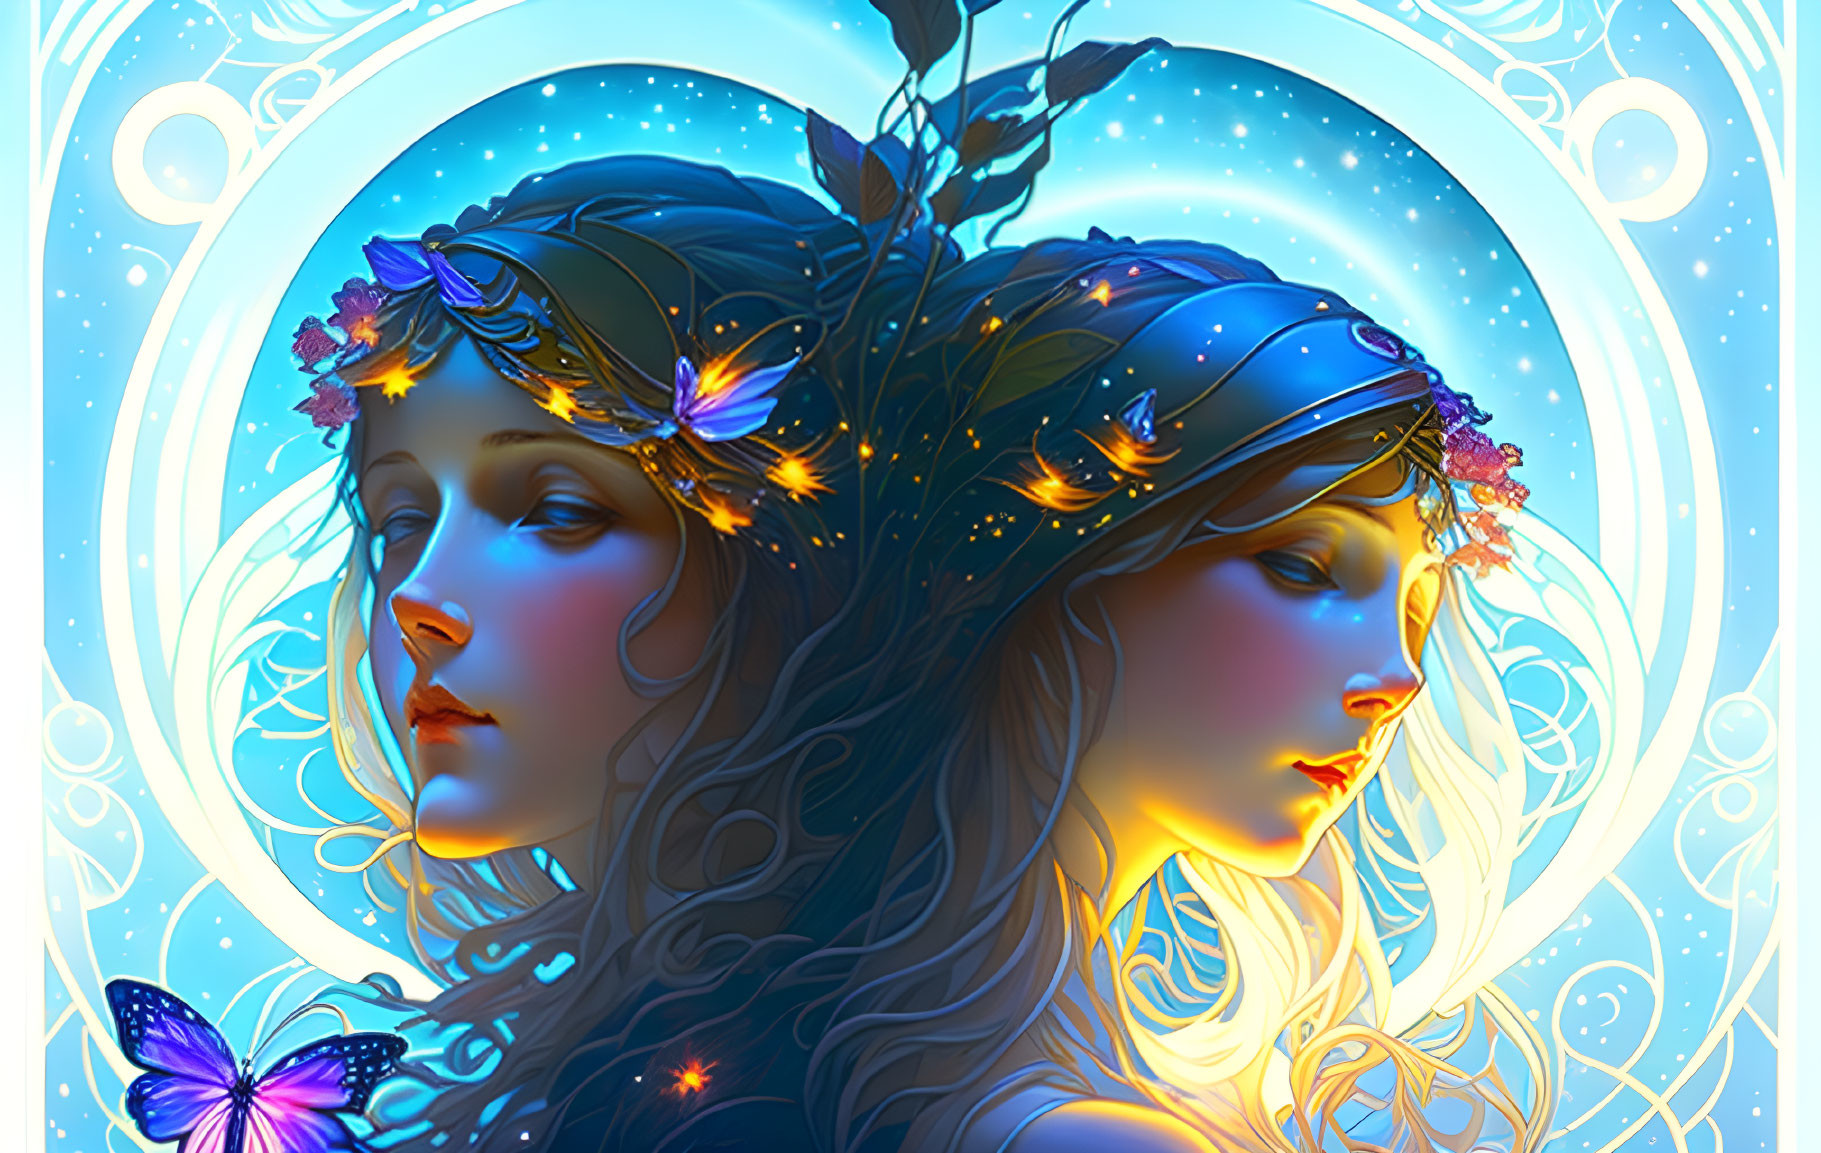 Ethereal women with ornate headdresses in luminous blue ambiance